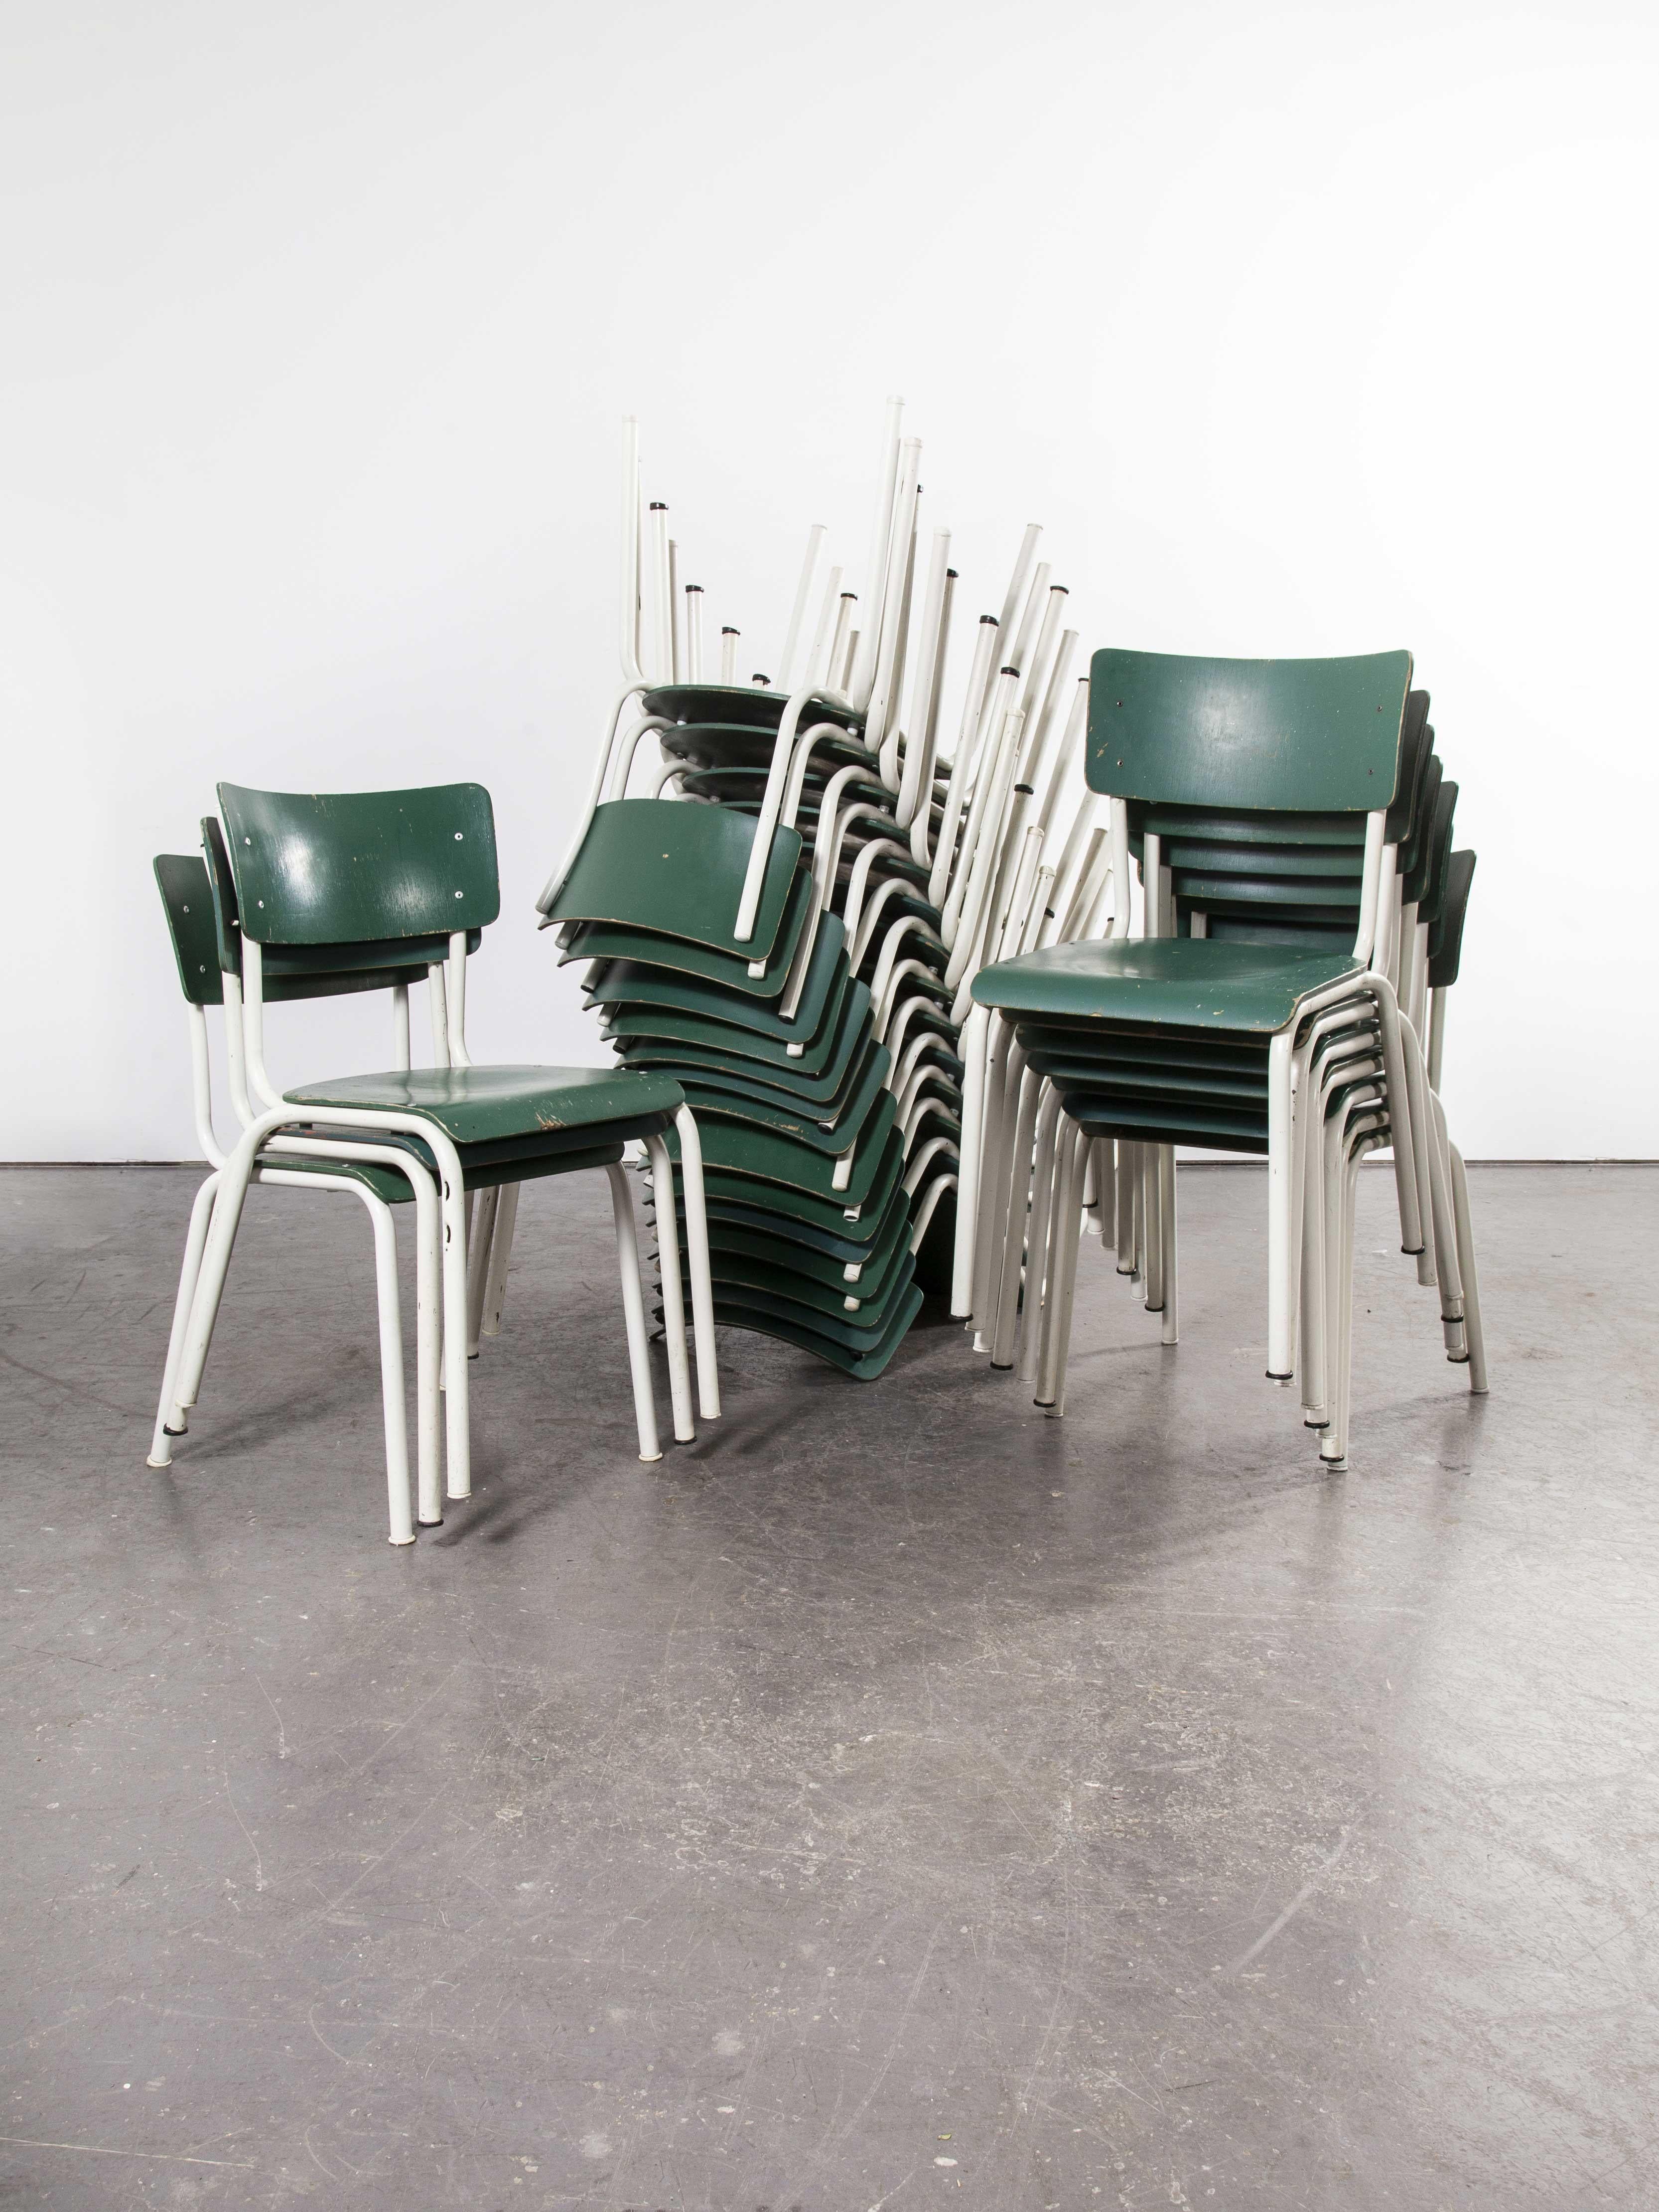 1970's Thonet Stacking Dining Chairs For The German Army - Green - Good Quantities Available

1970's Thonet stacking dining chairs for the German military - green - good quantities available. Commissioned by the Bundeswehr and made by Thonet these